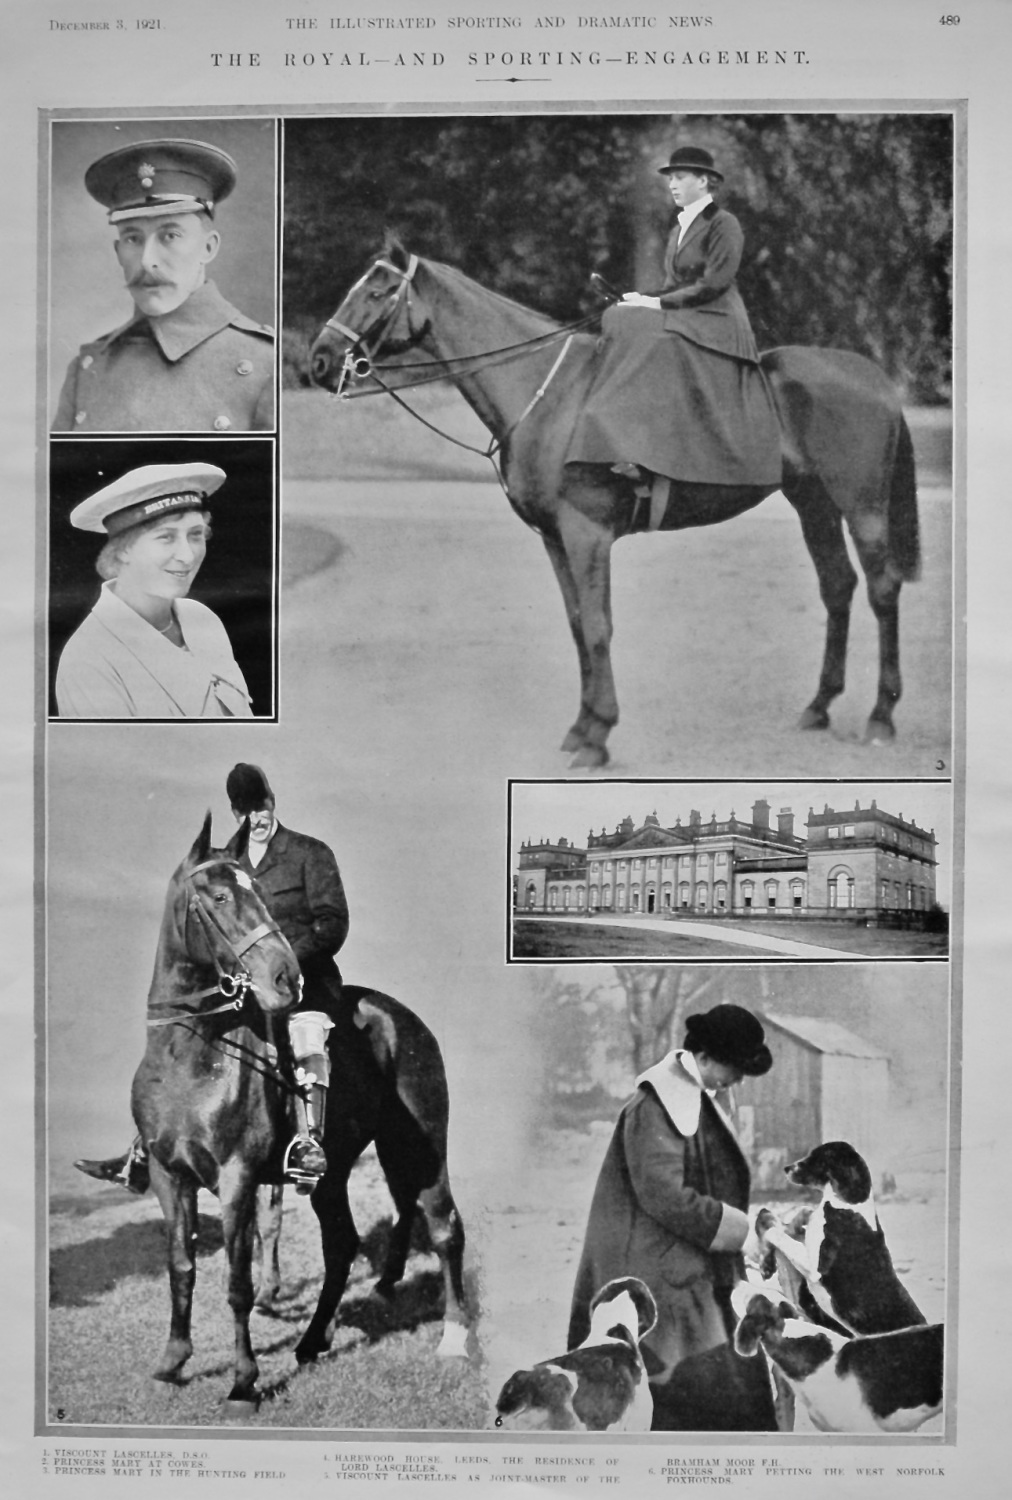 The Royal-and Sporting-Engagement. 1921.